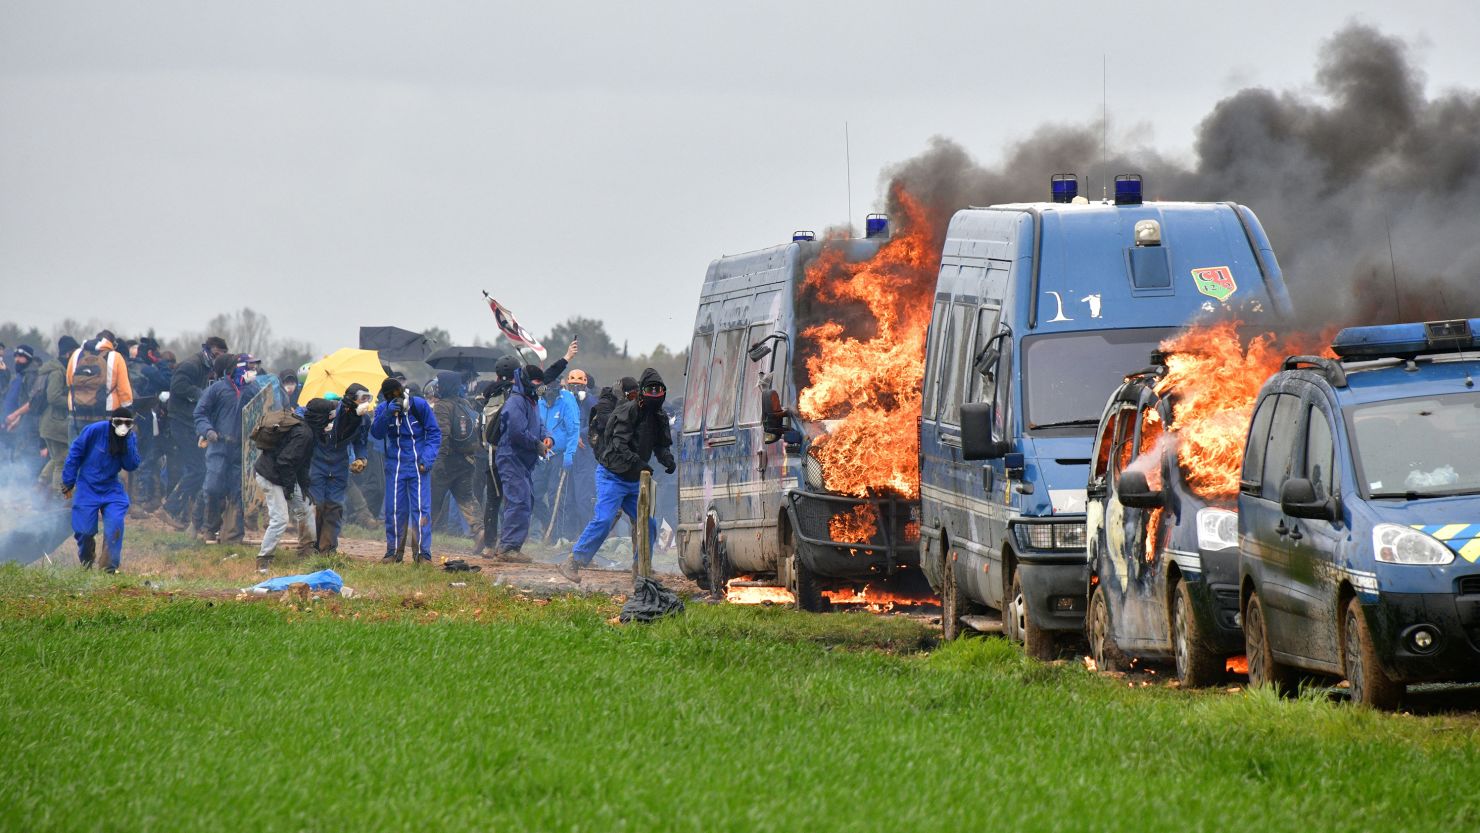 The climate group "Les Soulevements de la Terre" was among those protesting against a new water reserve for agricultural irrigation, in Sainte-Soline, central-western France, on March 25, 2023.